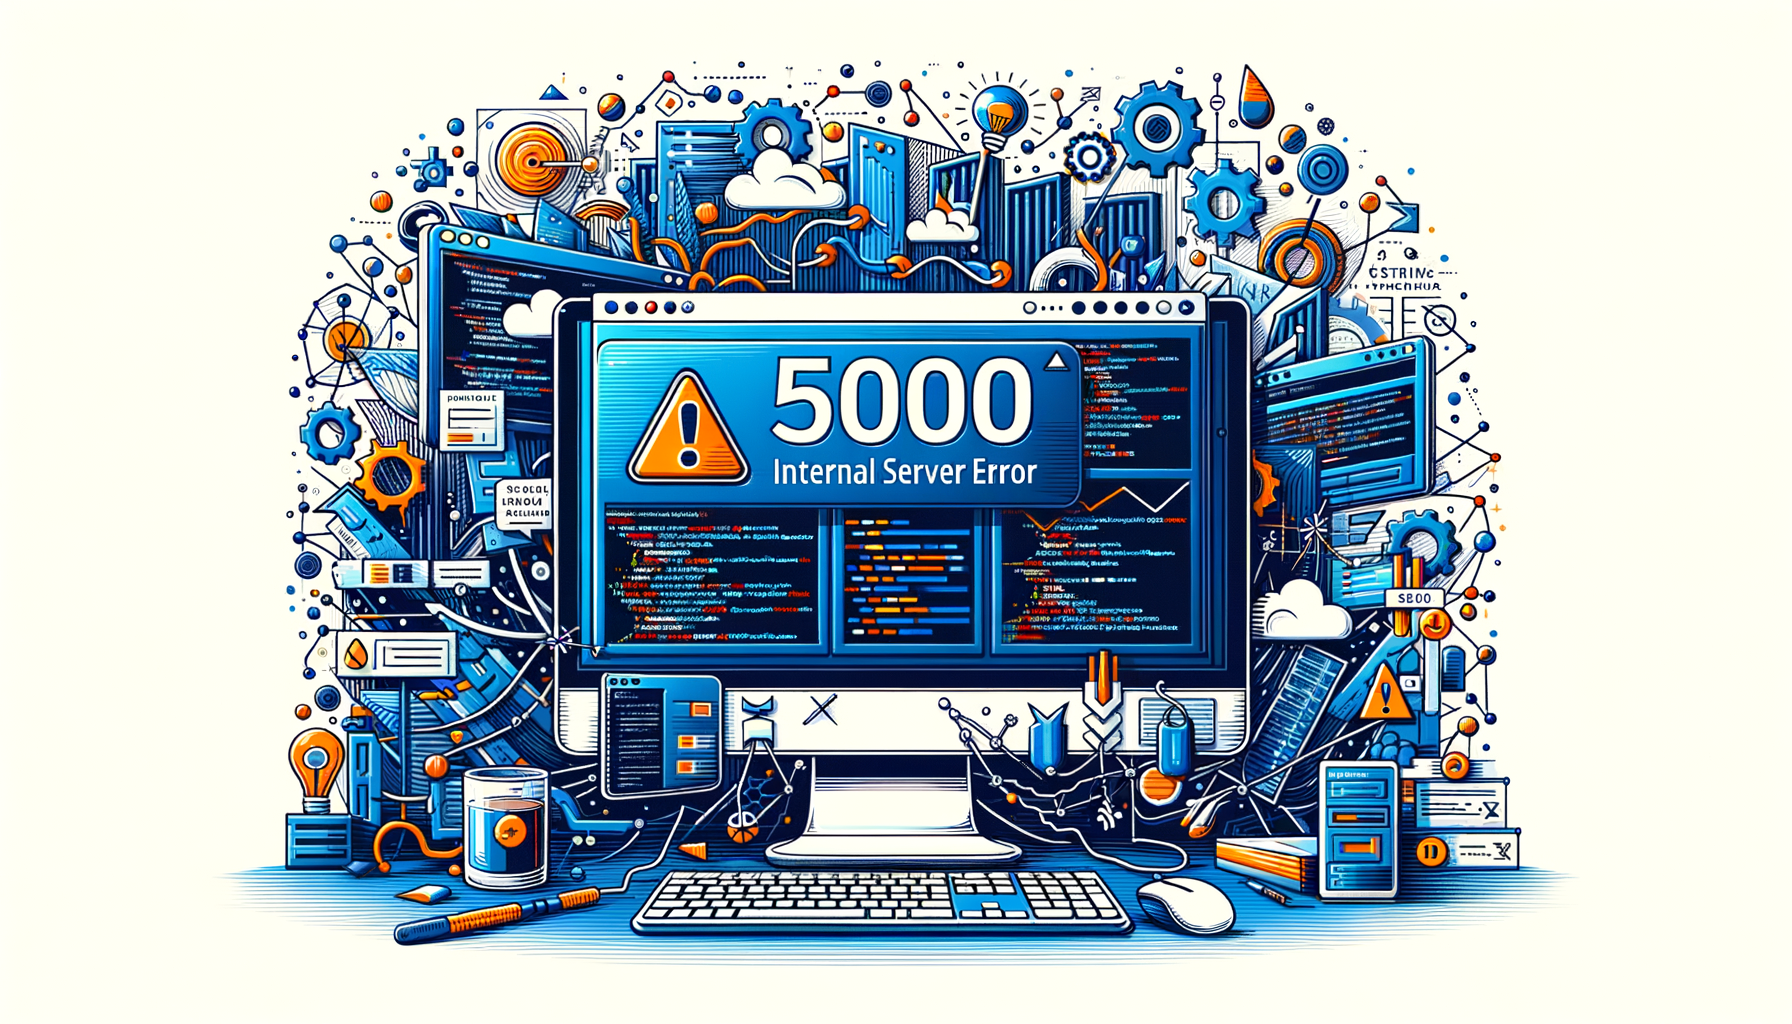 What causes a 500 Internal Server Error, and how does it impact a website?